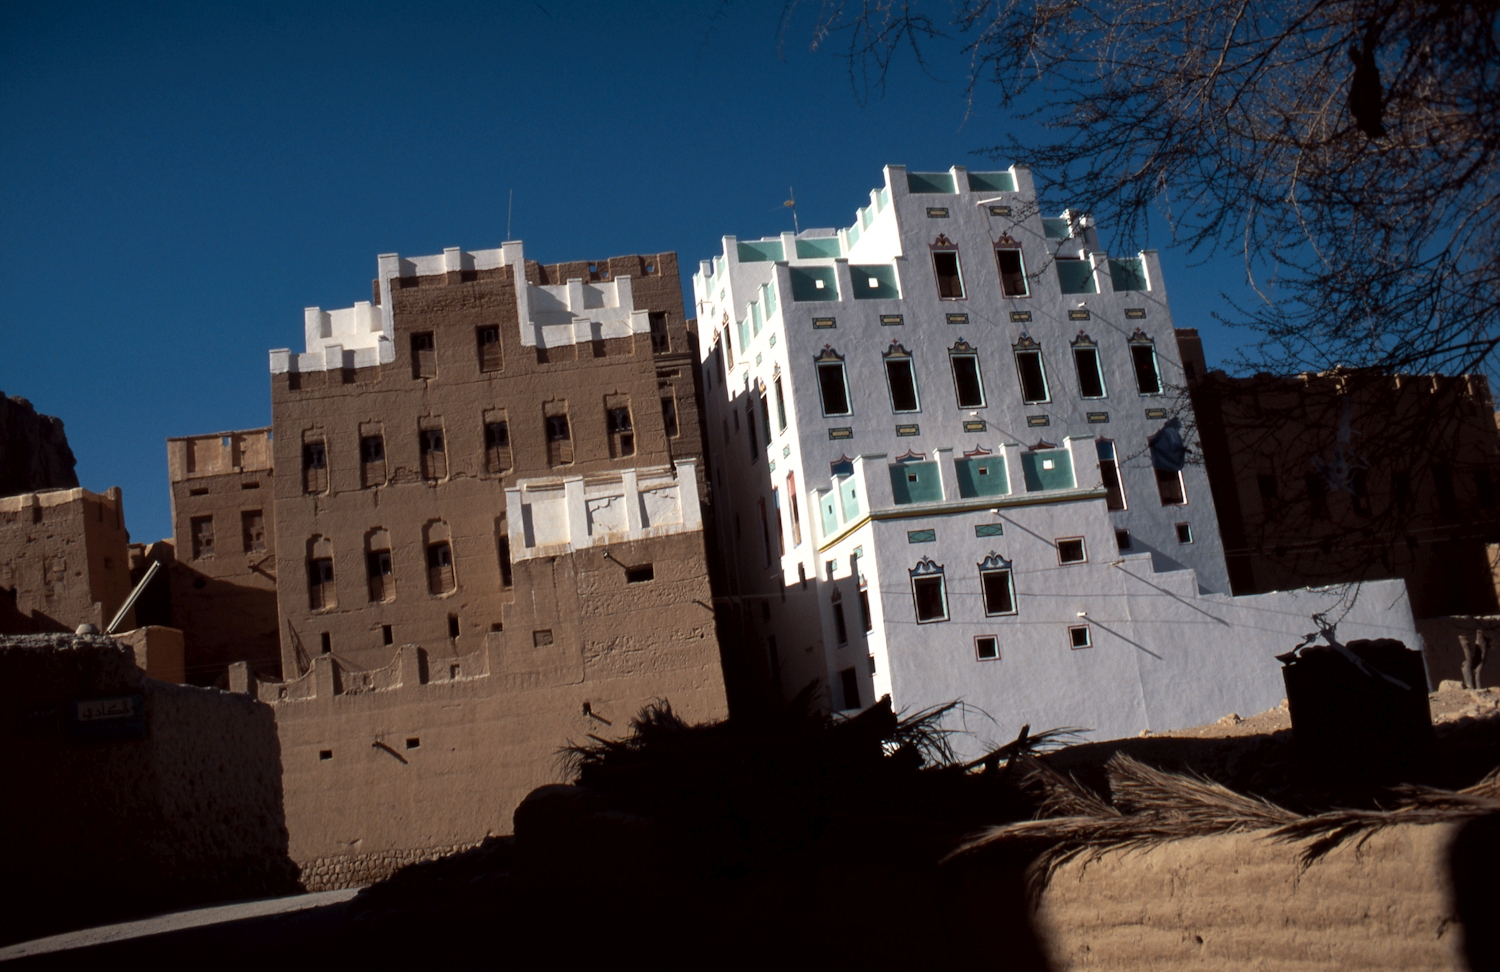 Peggy Crawford - Wadi Doan. A painted and a mostly unpainted multi-story mud brick building side by side